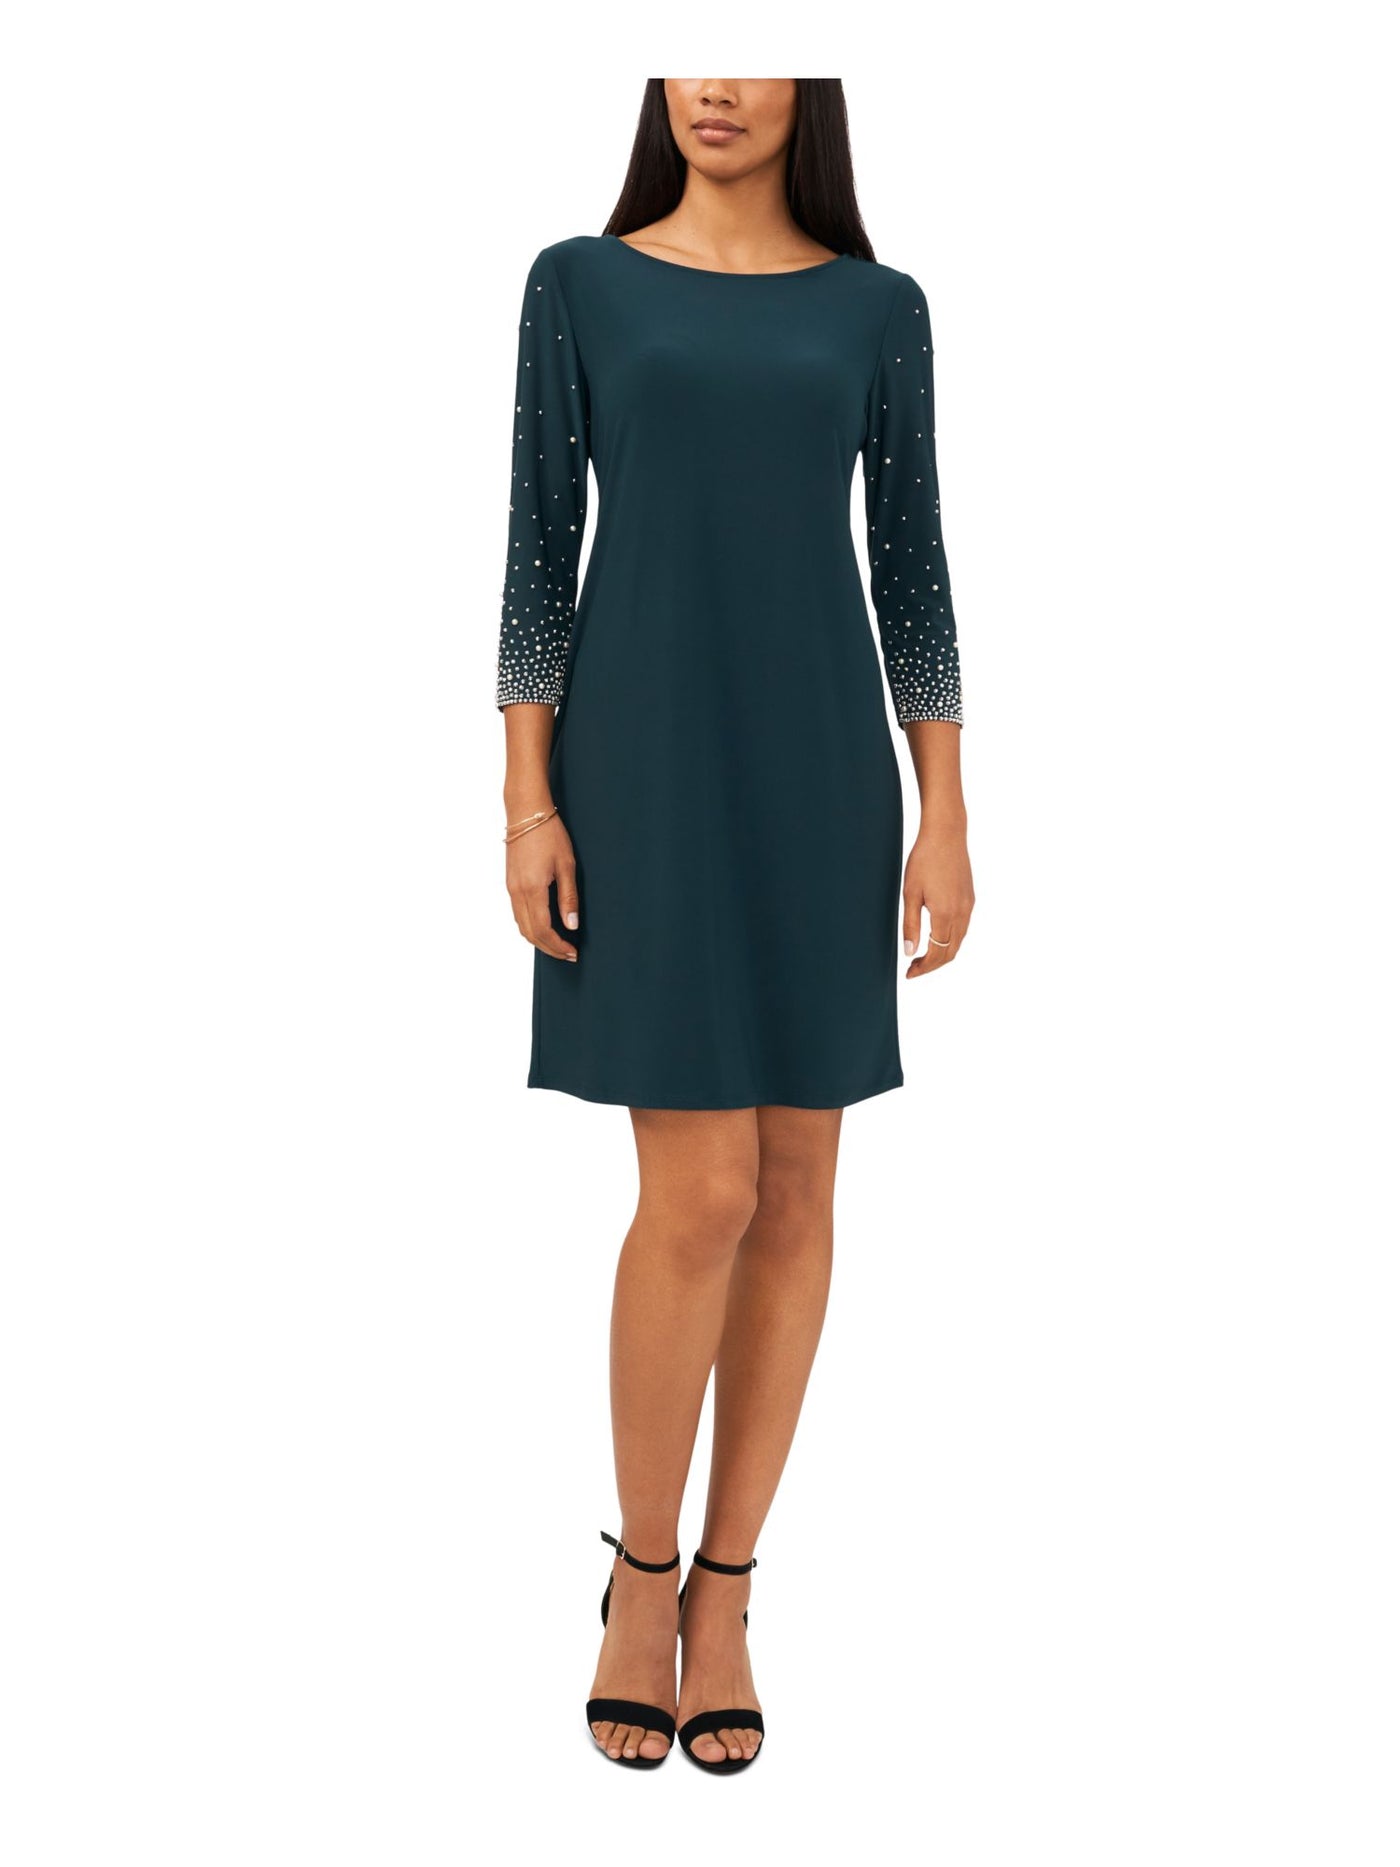 MSK Womens Teal Embellished Pullover Styling 3/4 Sleeve Scoop Neck Above The Knee Party Sheath Dress L